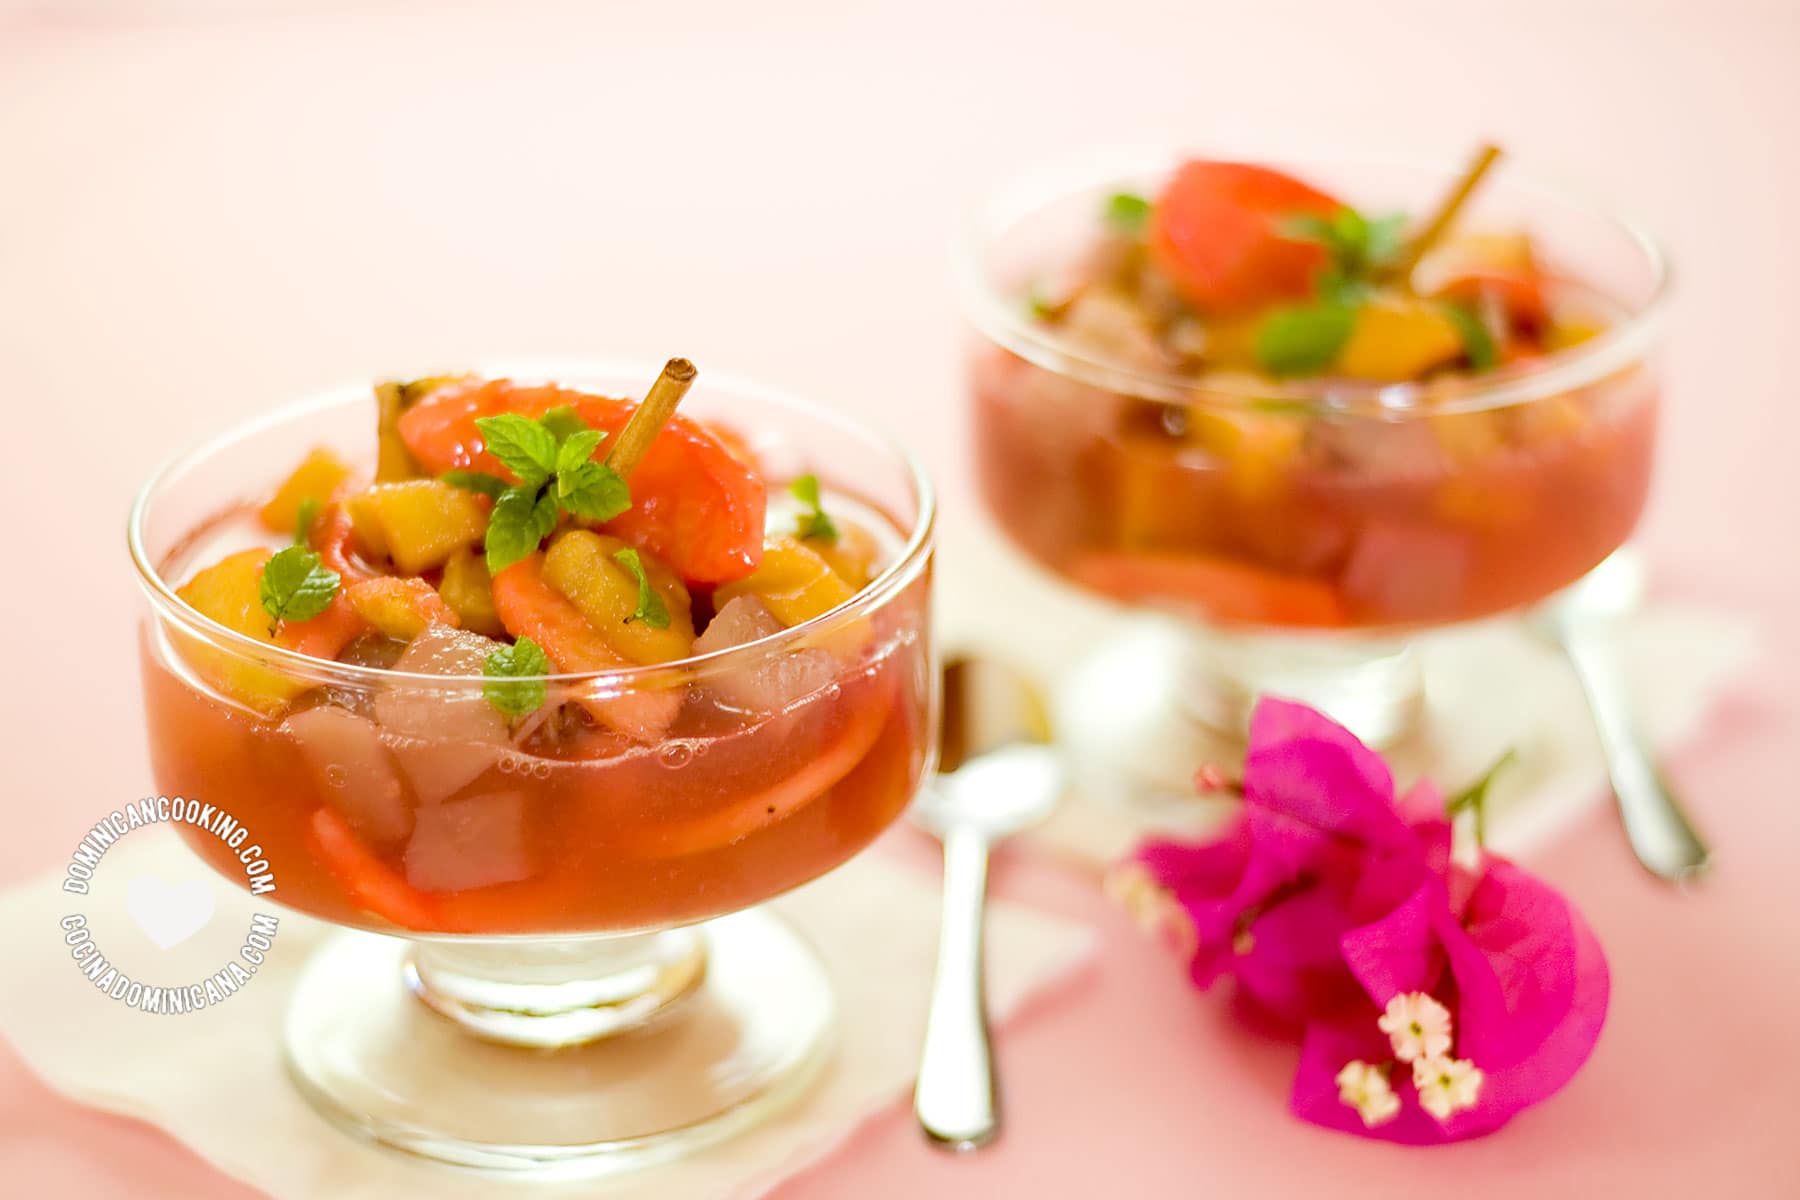 Mala rabia (plantain and guava in spiced syrup).